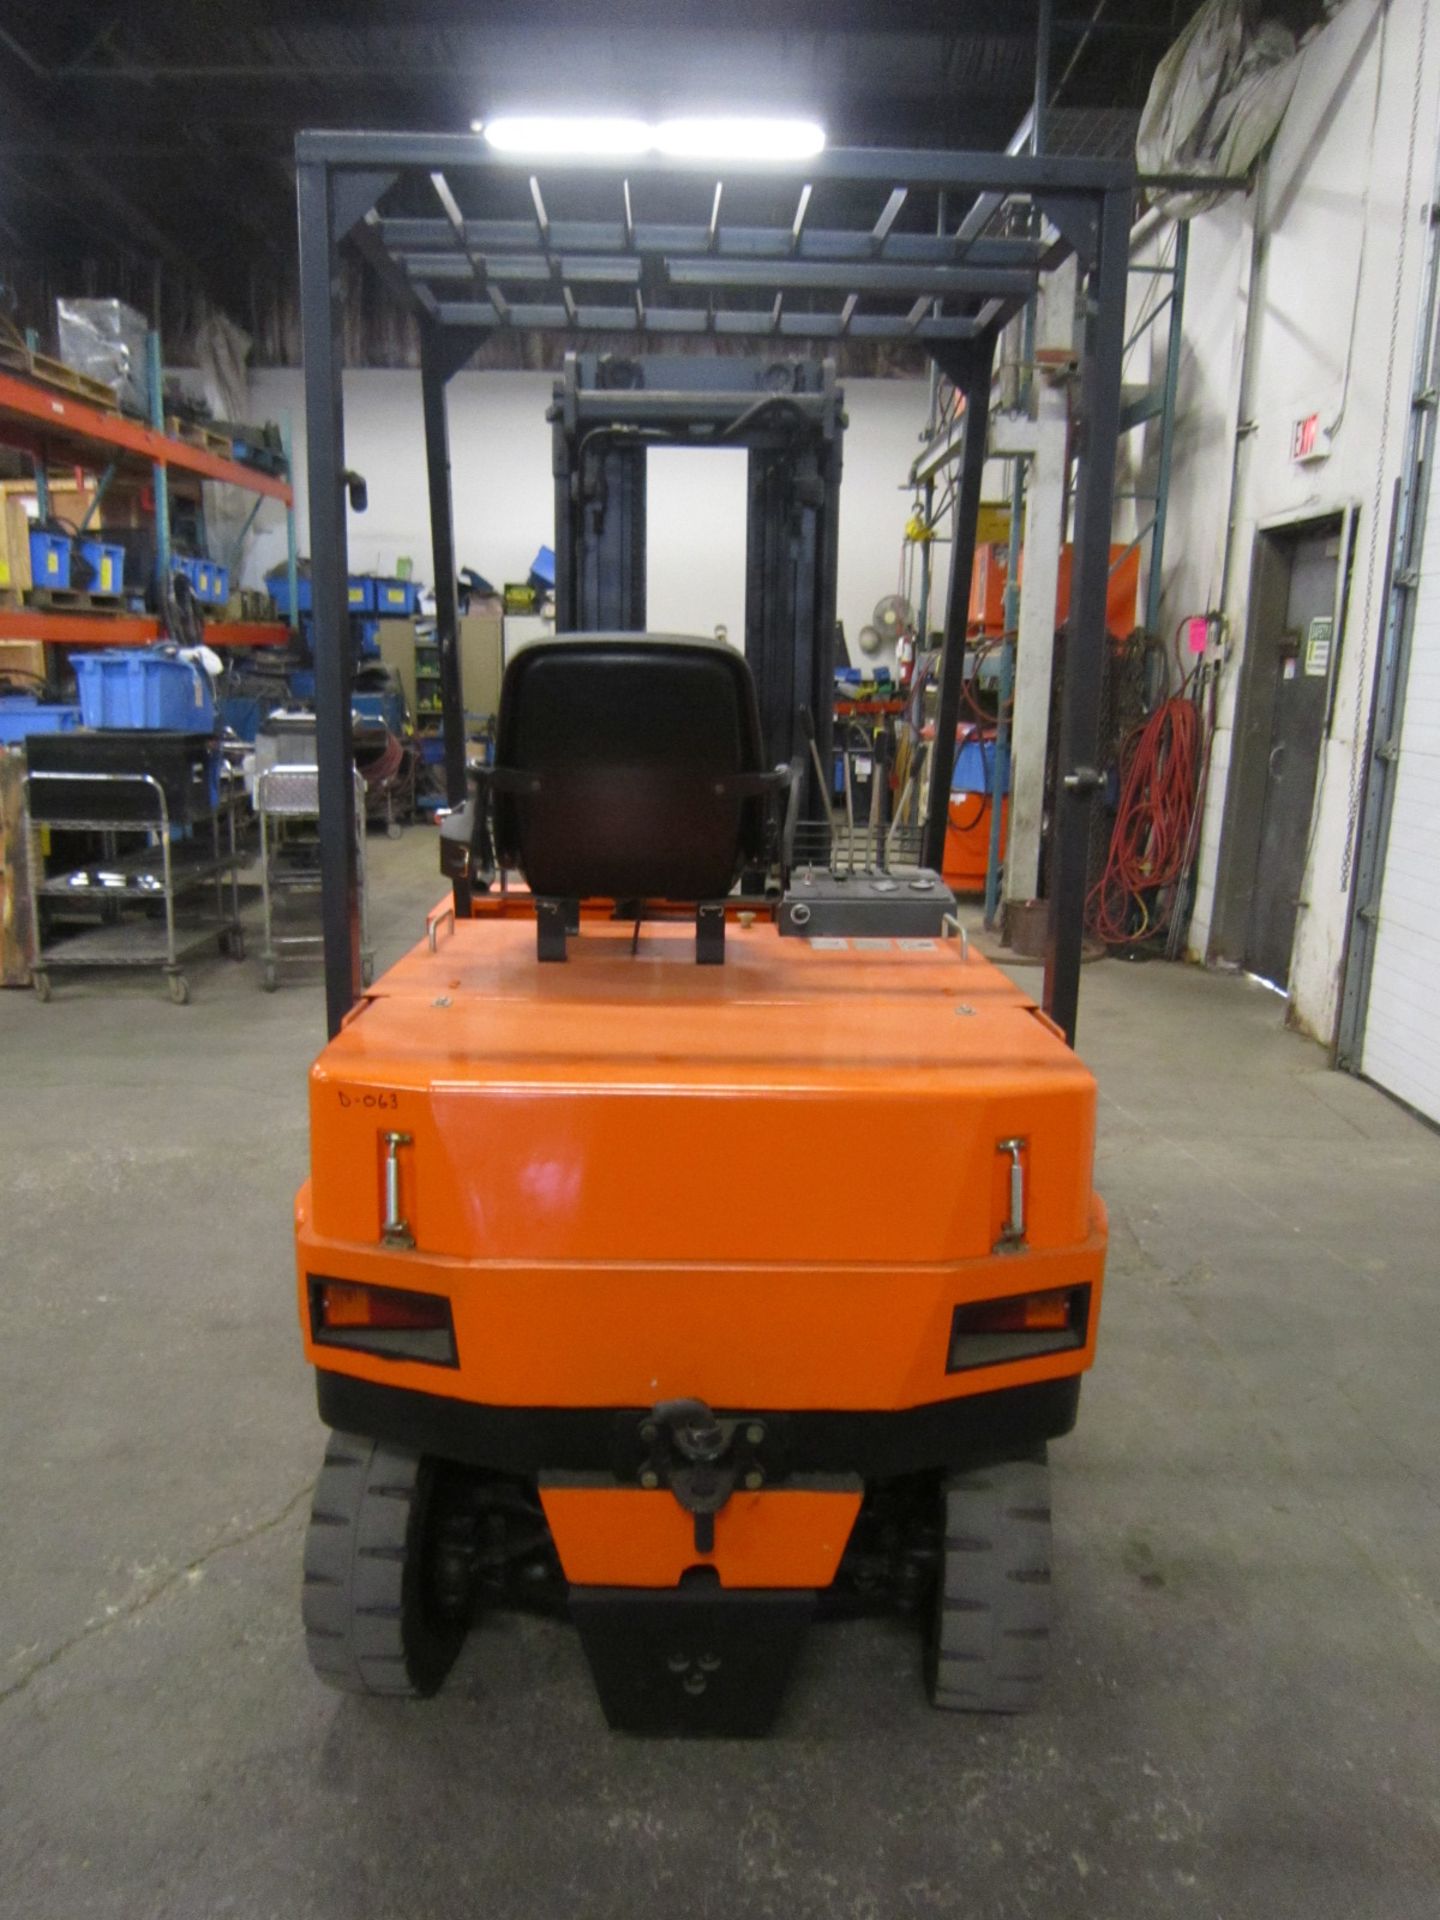 2008 Mitsubishi Diamond Electric Forklift 4000lbs Capacity with 3-stage mast - MINT UNIT only 4 - Image 3 of 3